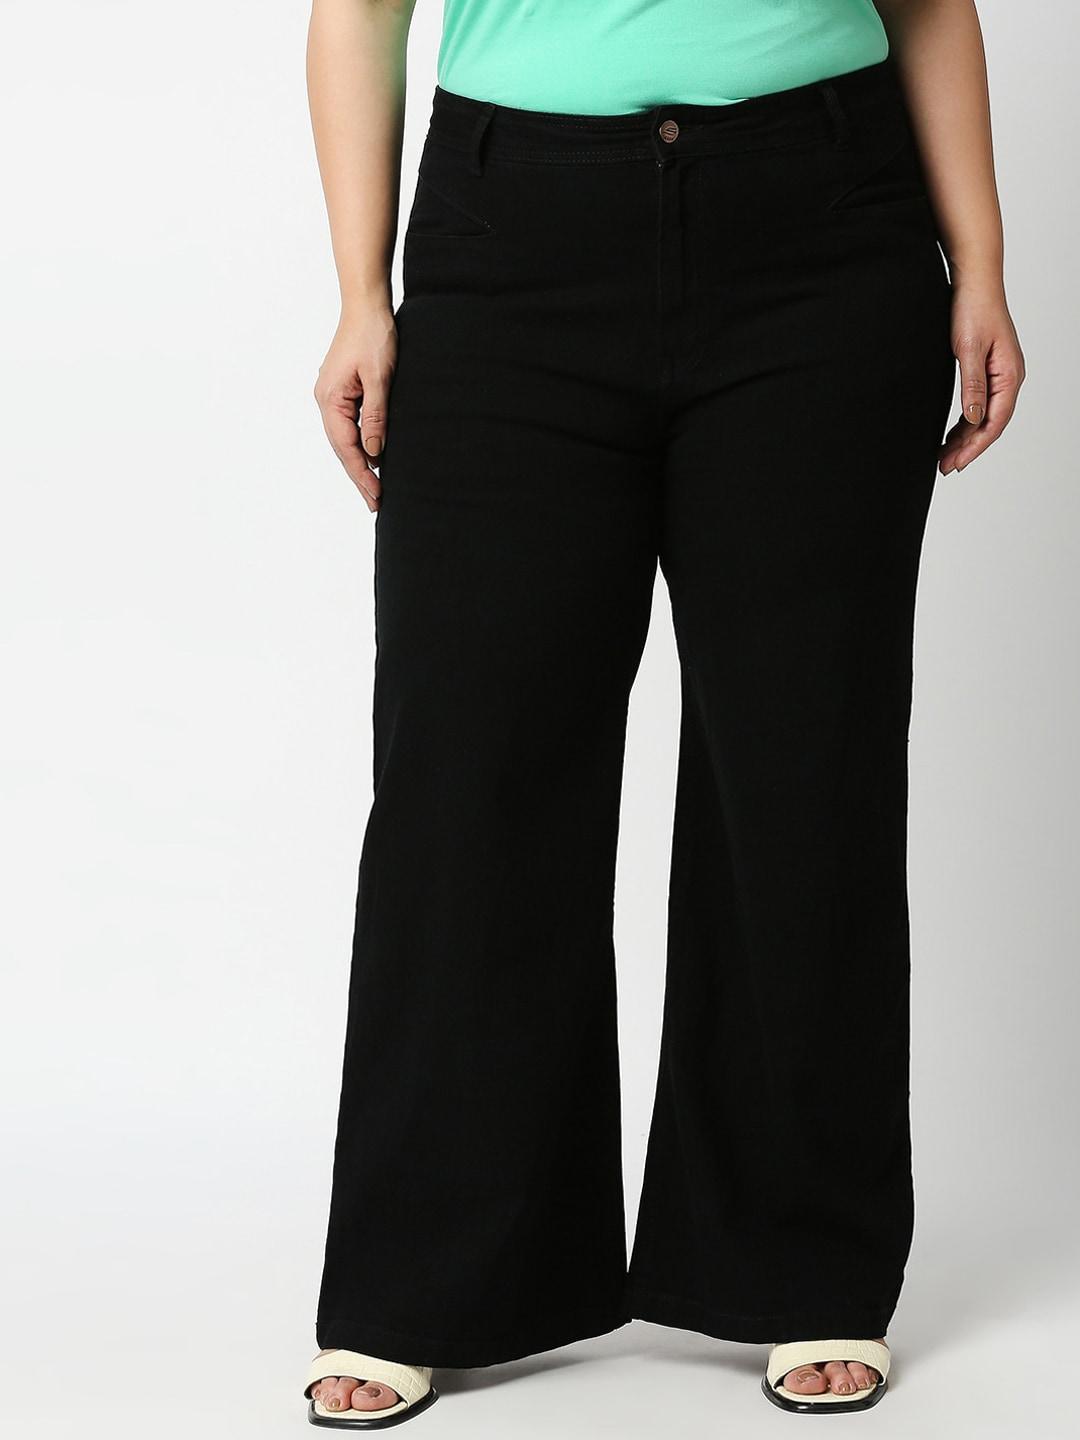 high-star-women-plus-size-black-wide-leg-high-rise-stretchable-jeans